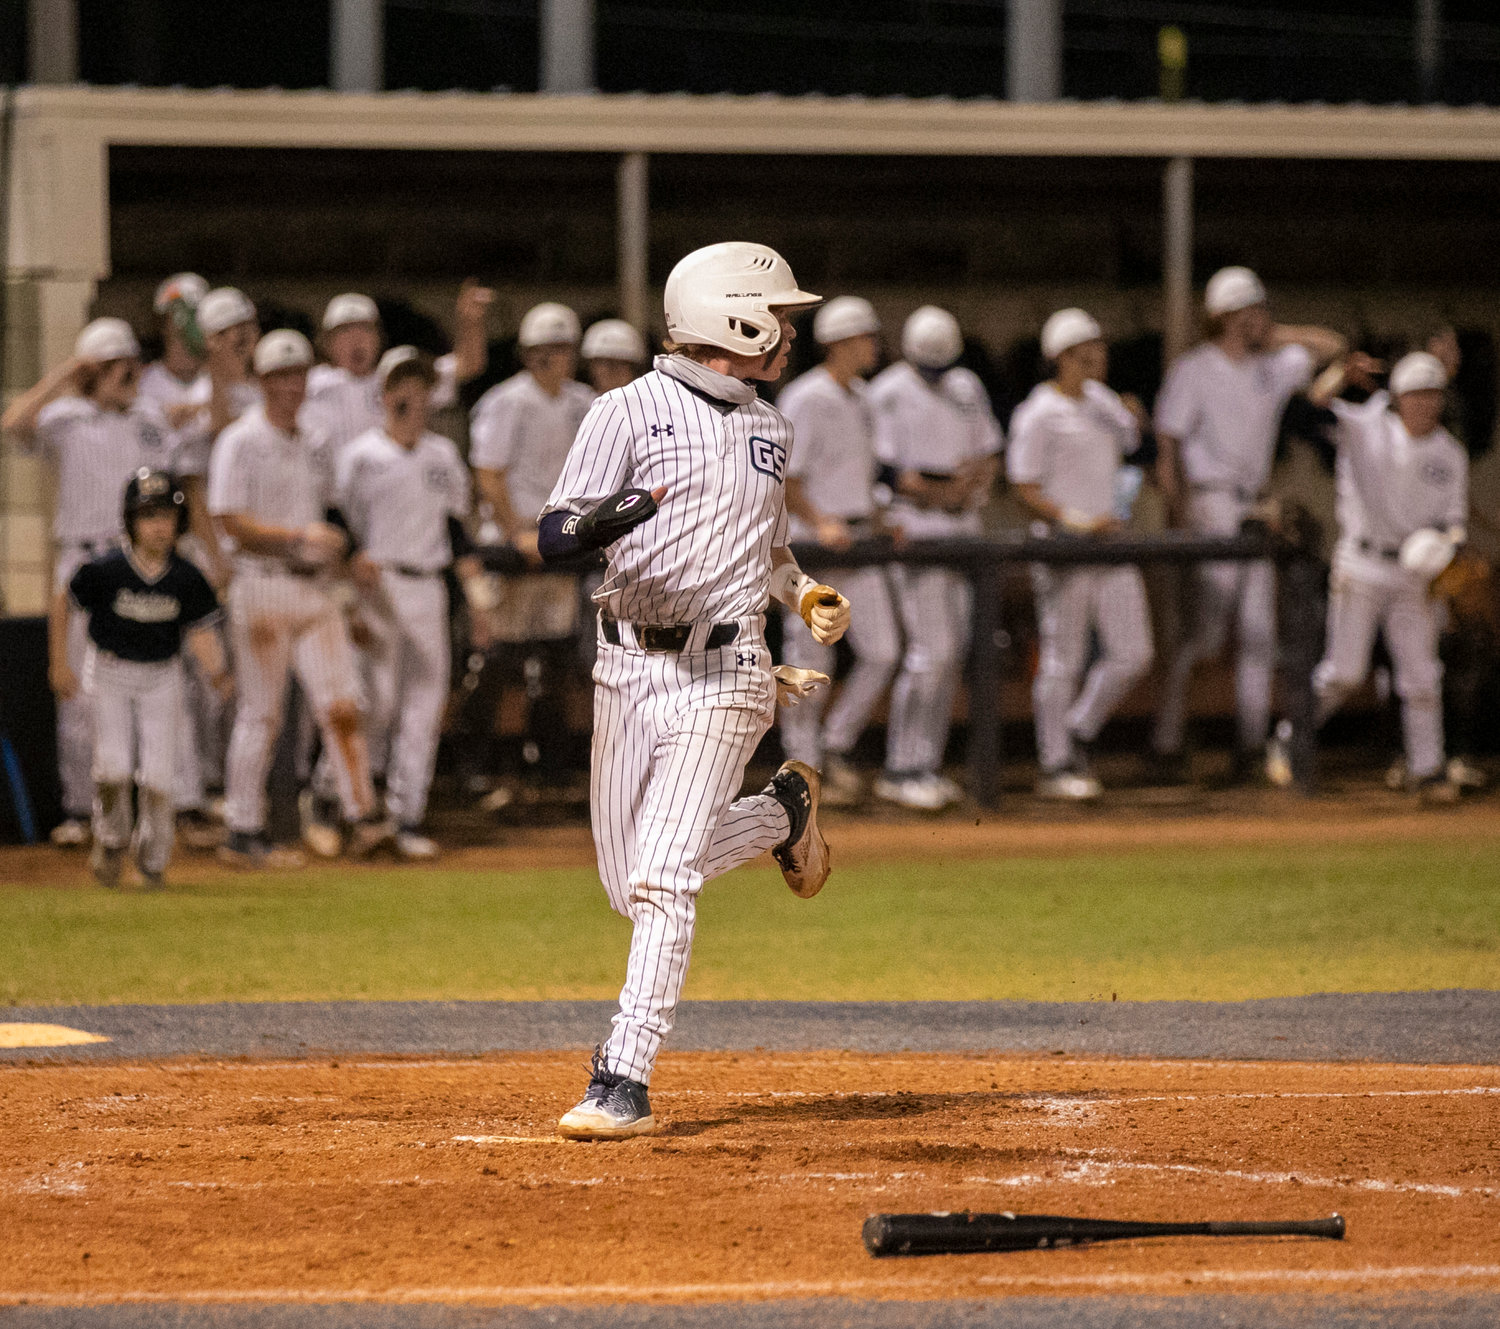 Gulf Shores’ Joseph Stephens comes around to hit home which scored the first run in the island rivalry between the Dolphins and Orange Beach Makos Friday night, Feb. 24, in the teams’ first meeting.